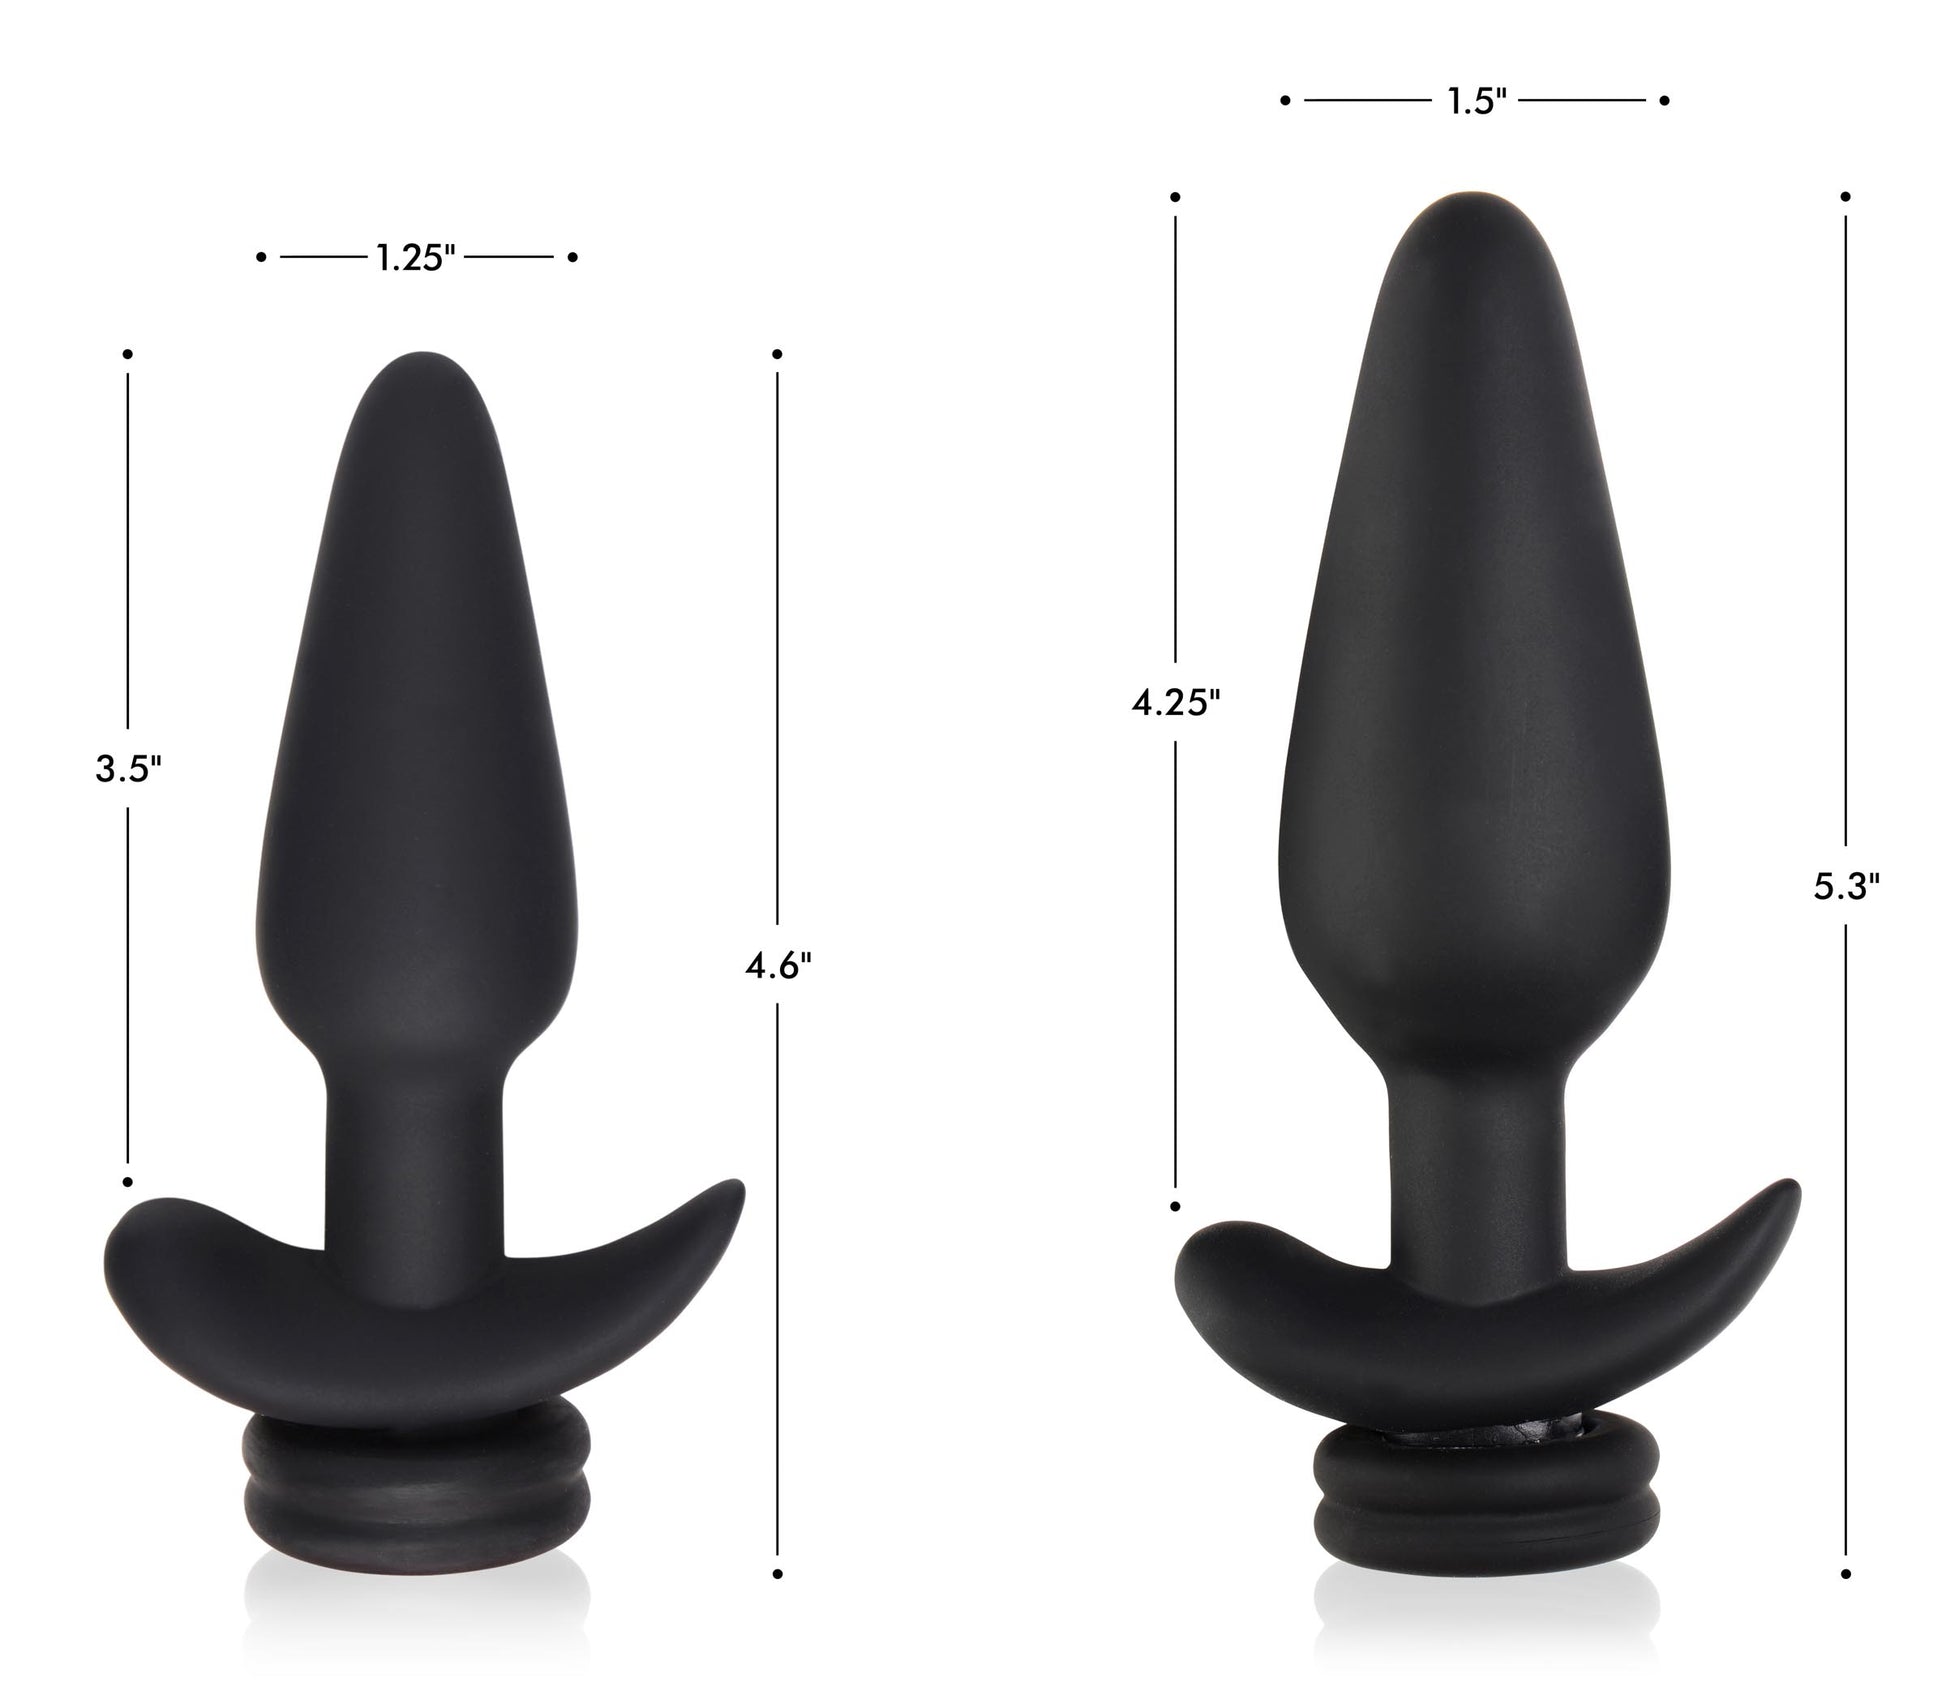 Small Vibrating Anal Plug with Interchangeable Fox Tail - White - UABDSM